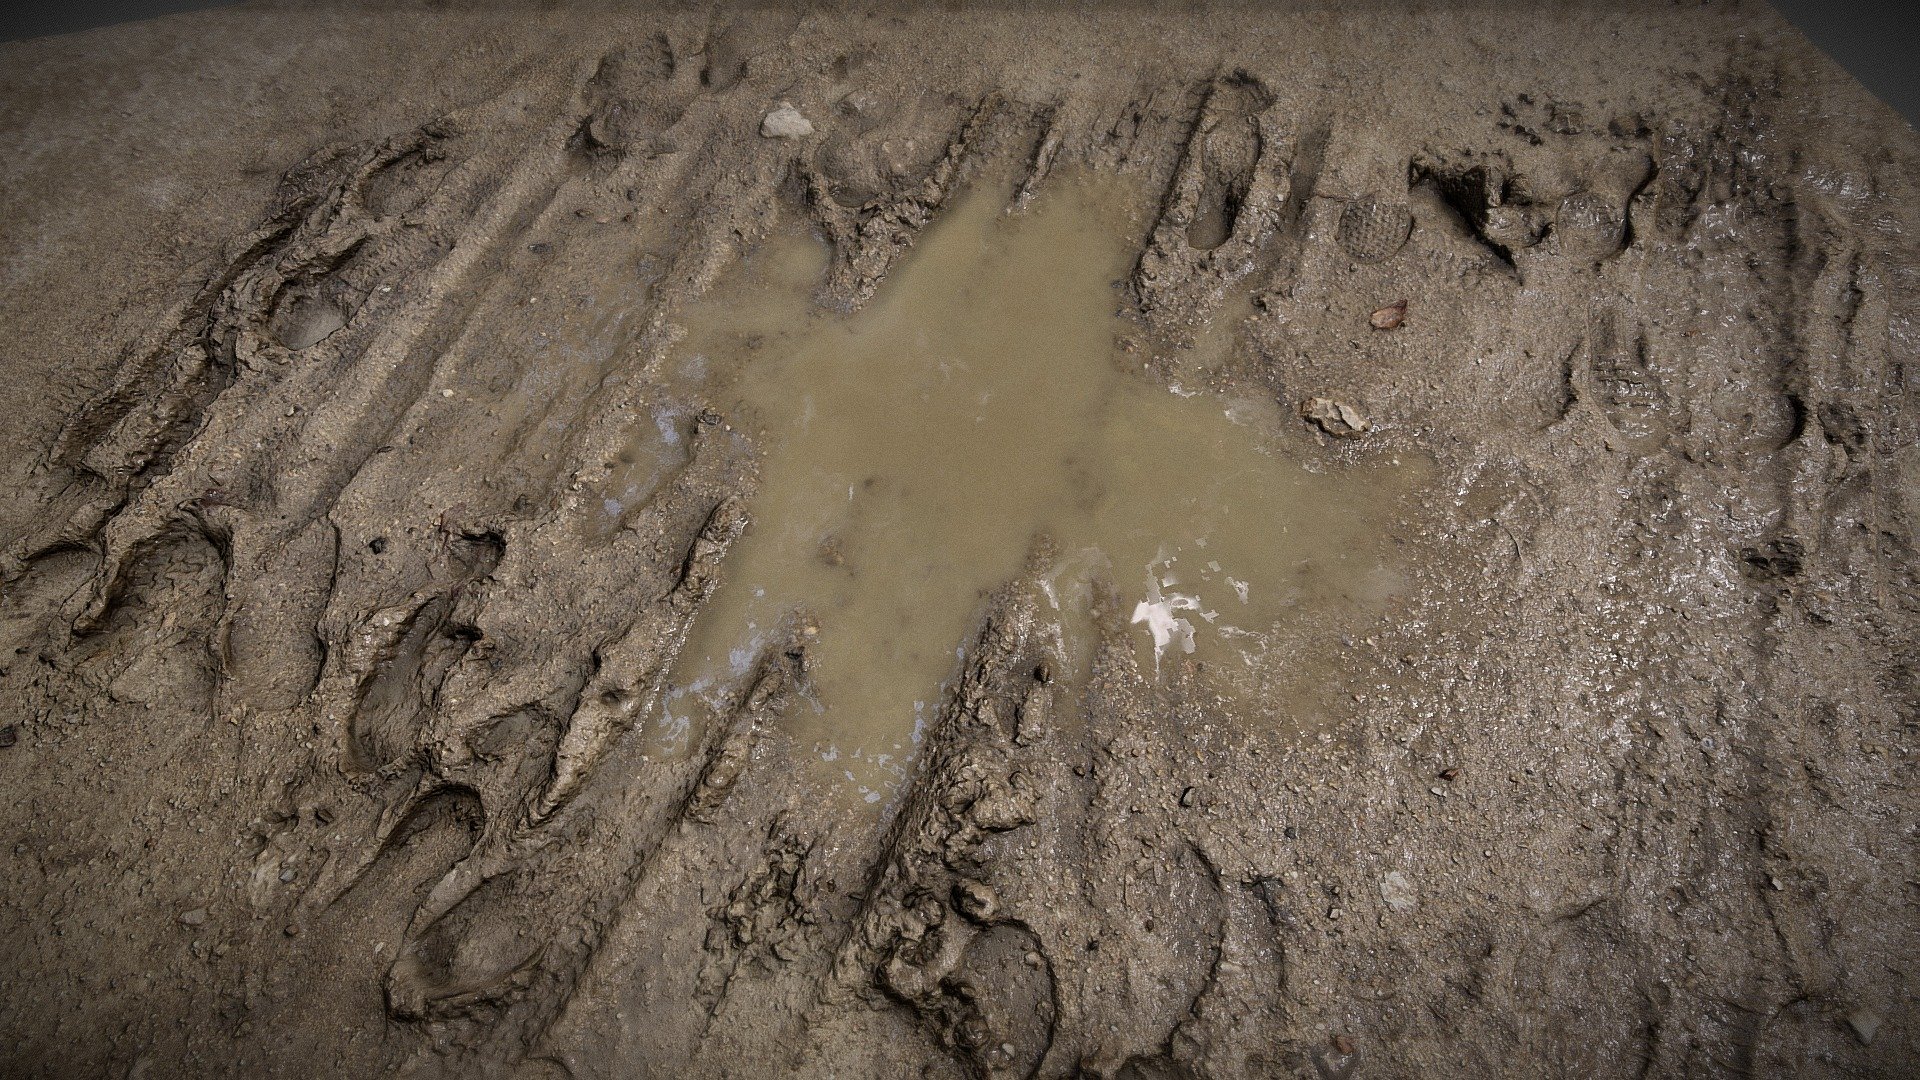 Photogrammetry scan of this Mud Puddle made with a 100 pictures.
8K textures with PBR treatment , gameready asset 3d model